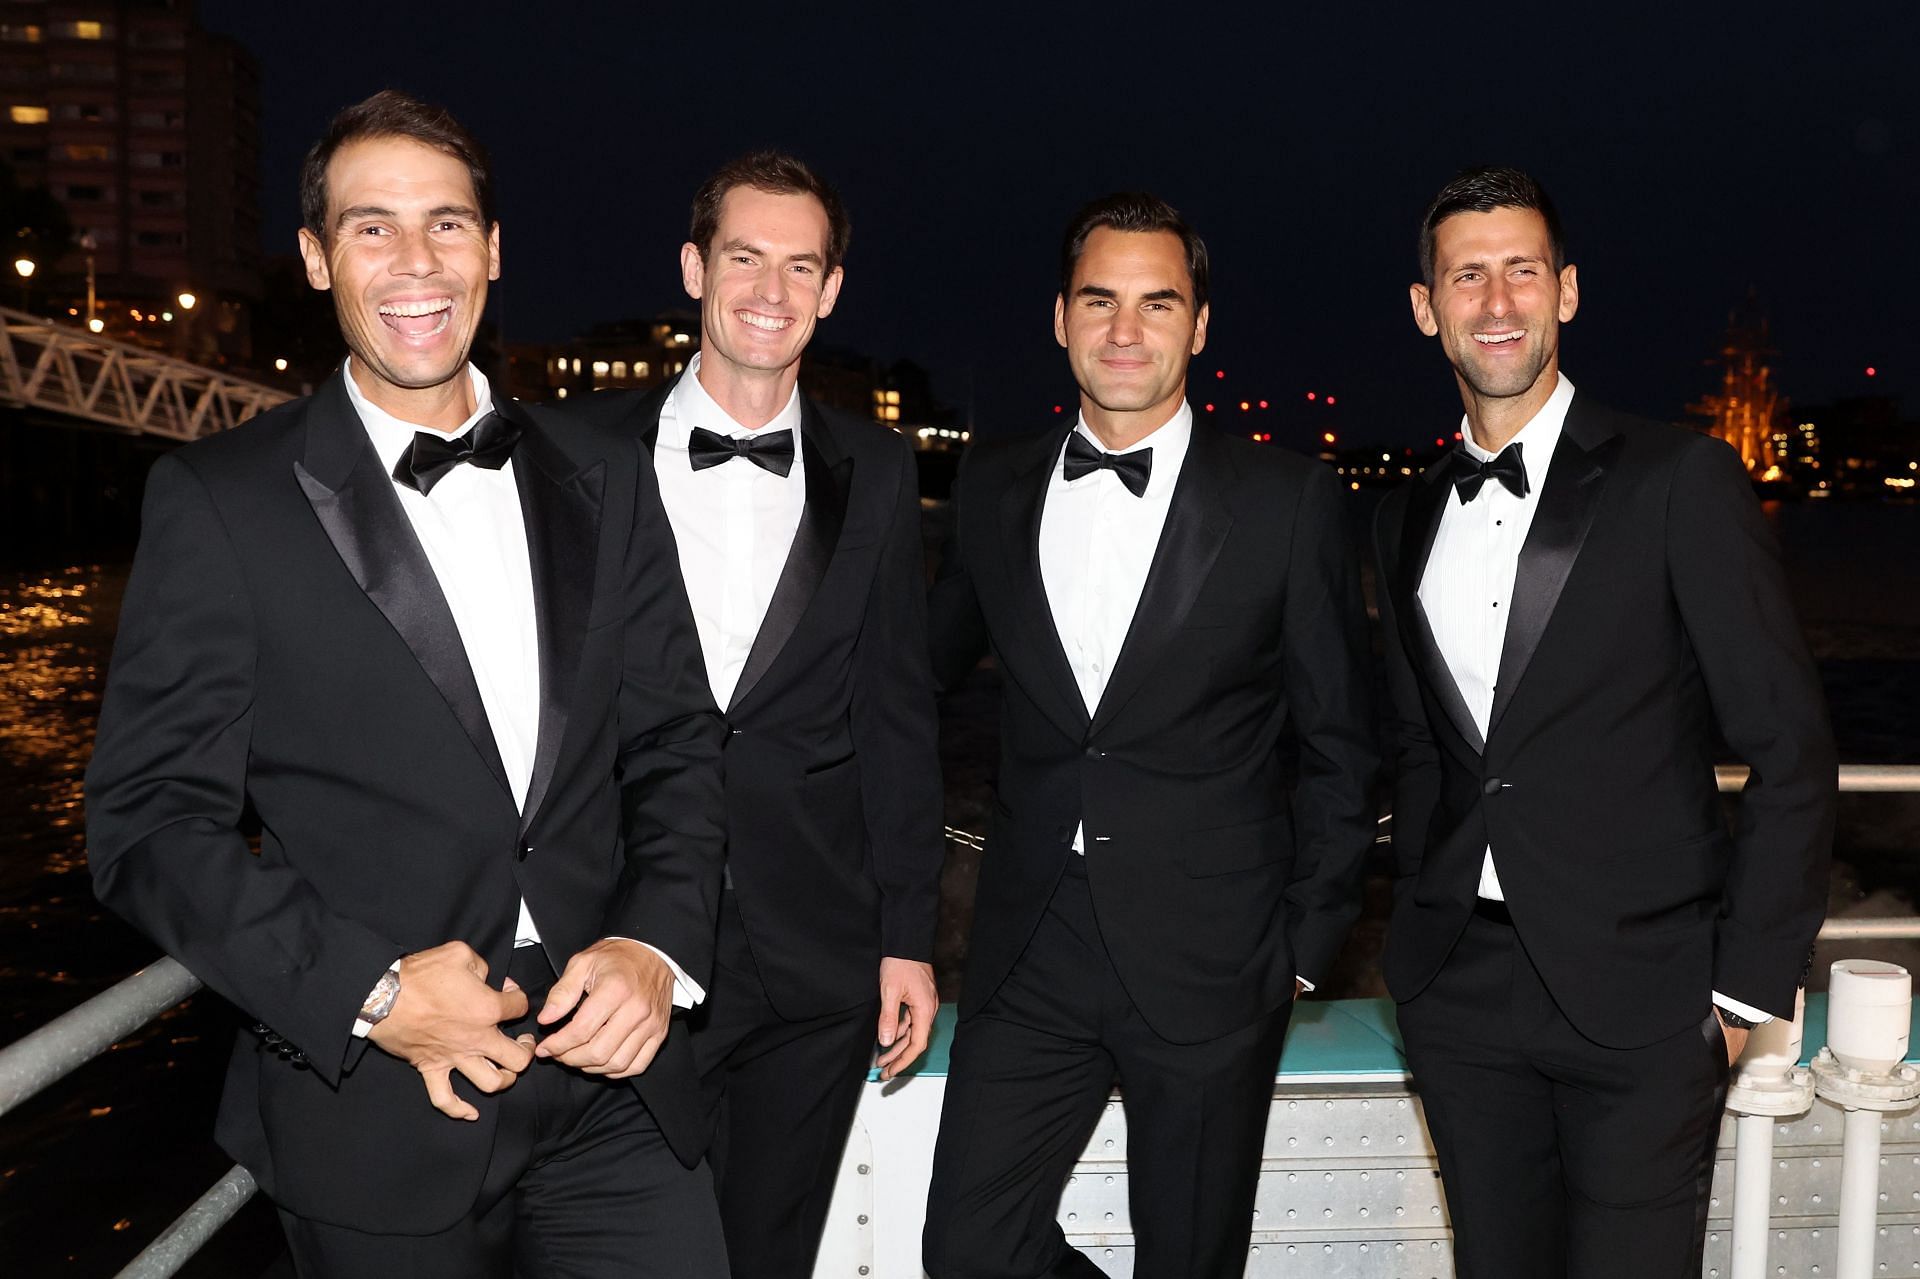 The Big Four, which includes Andy Murray (second from left), during the 2022 Laver Cup off-court activities